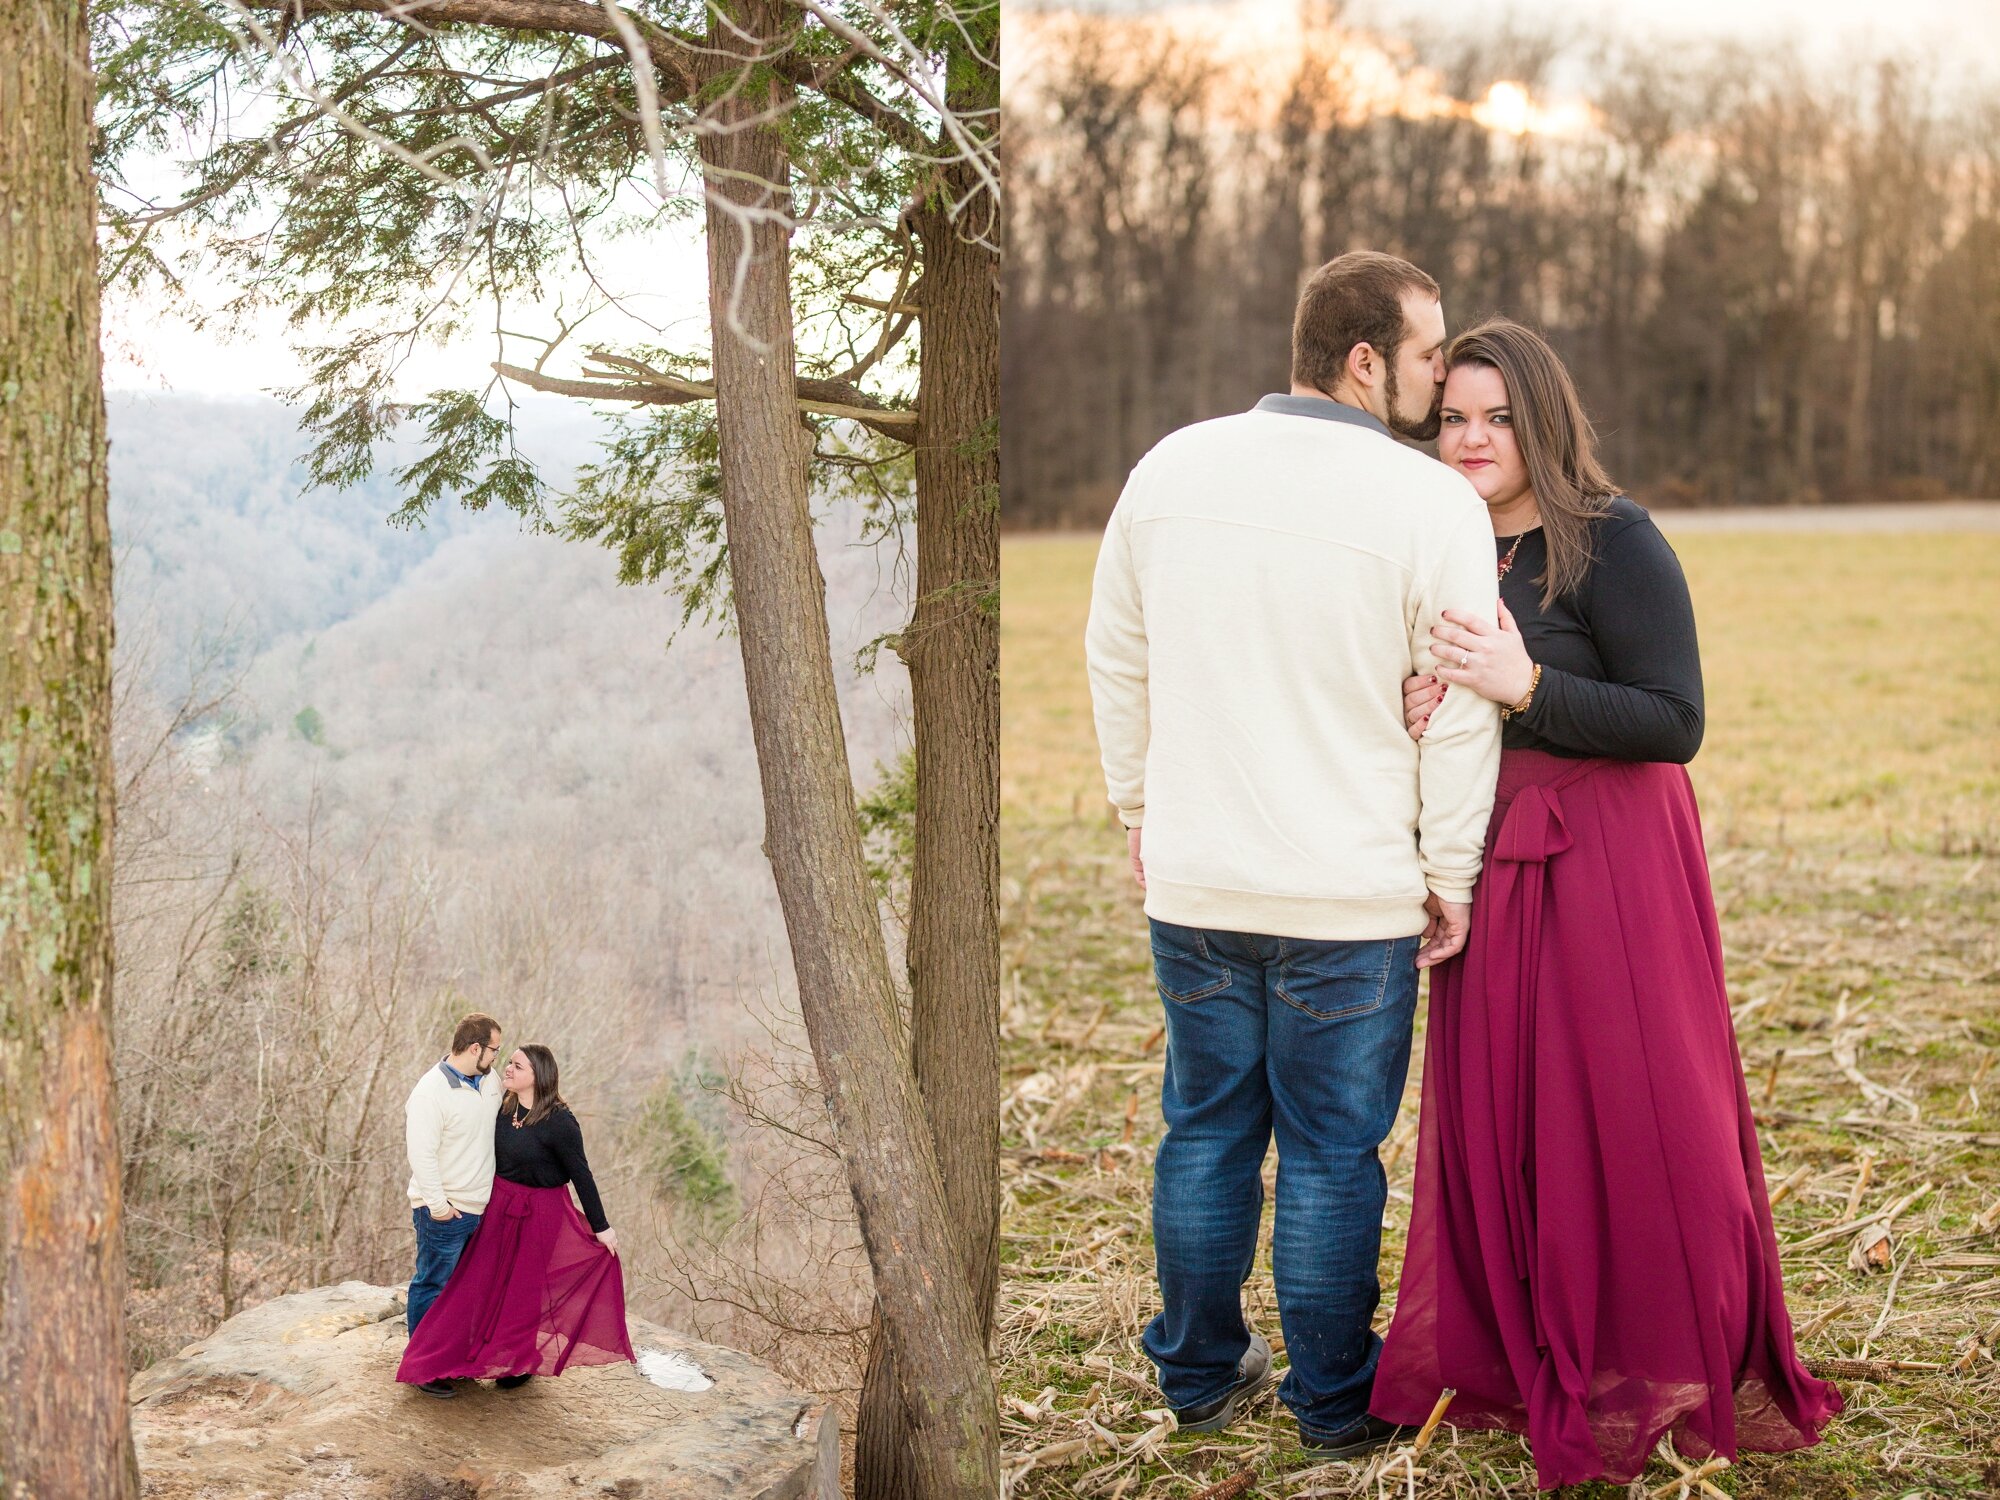 locations for photo shoot pittsburgh, what to wear for winter photo shoot, pittsburgh wedding photographer, mcconnells mill engagement photos